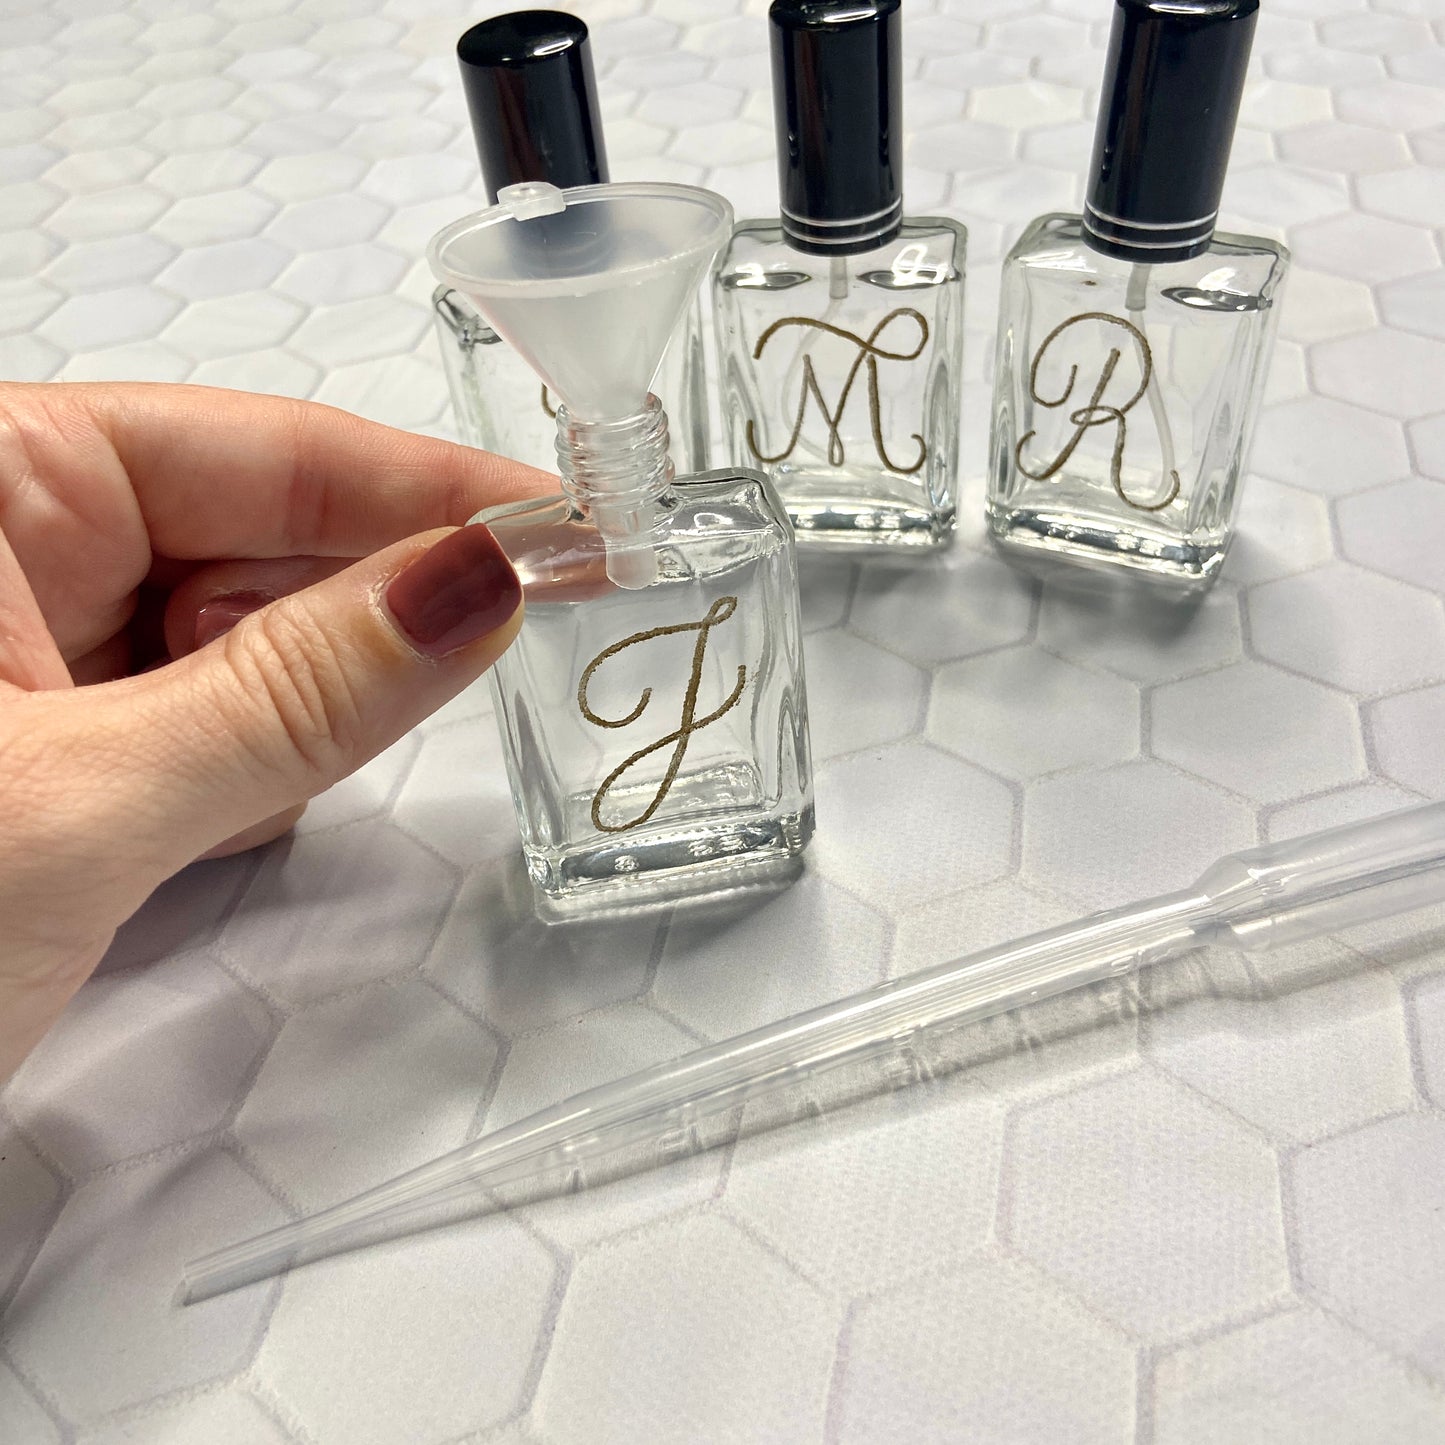 Engraved Perfume Bottle - Refillable Travel-Size Perfume Bottles Personalized with Initial